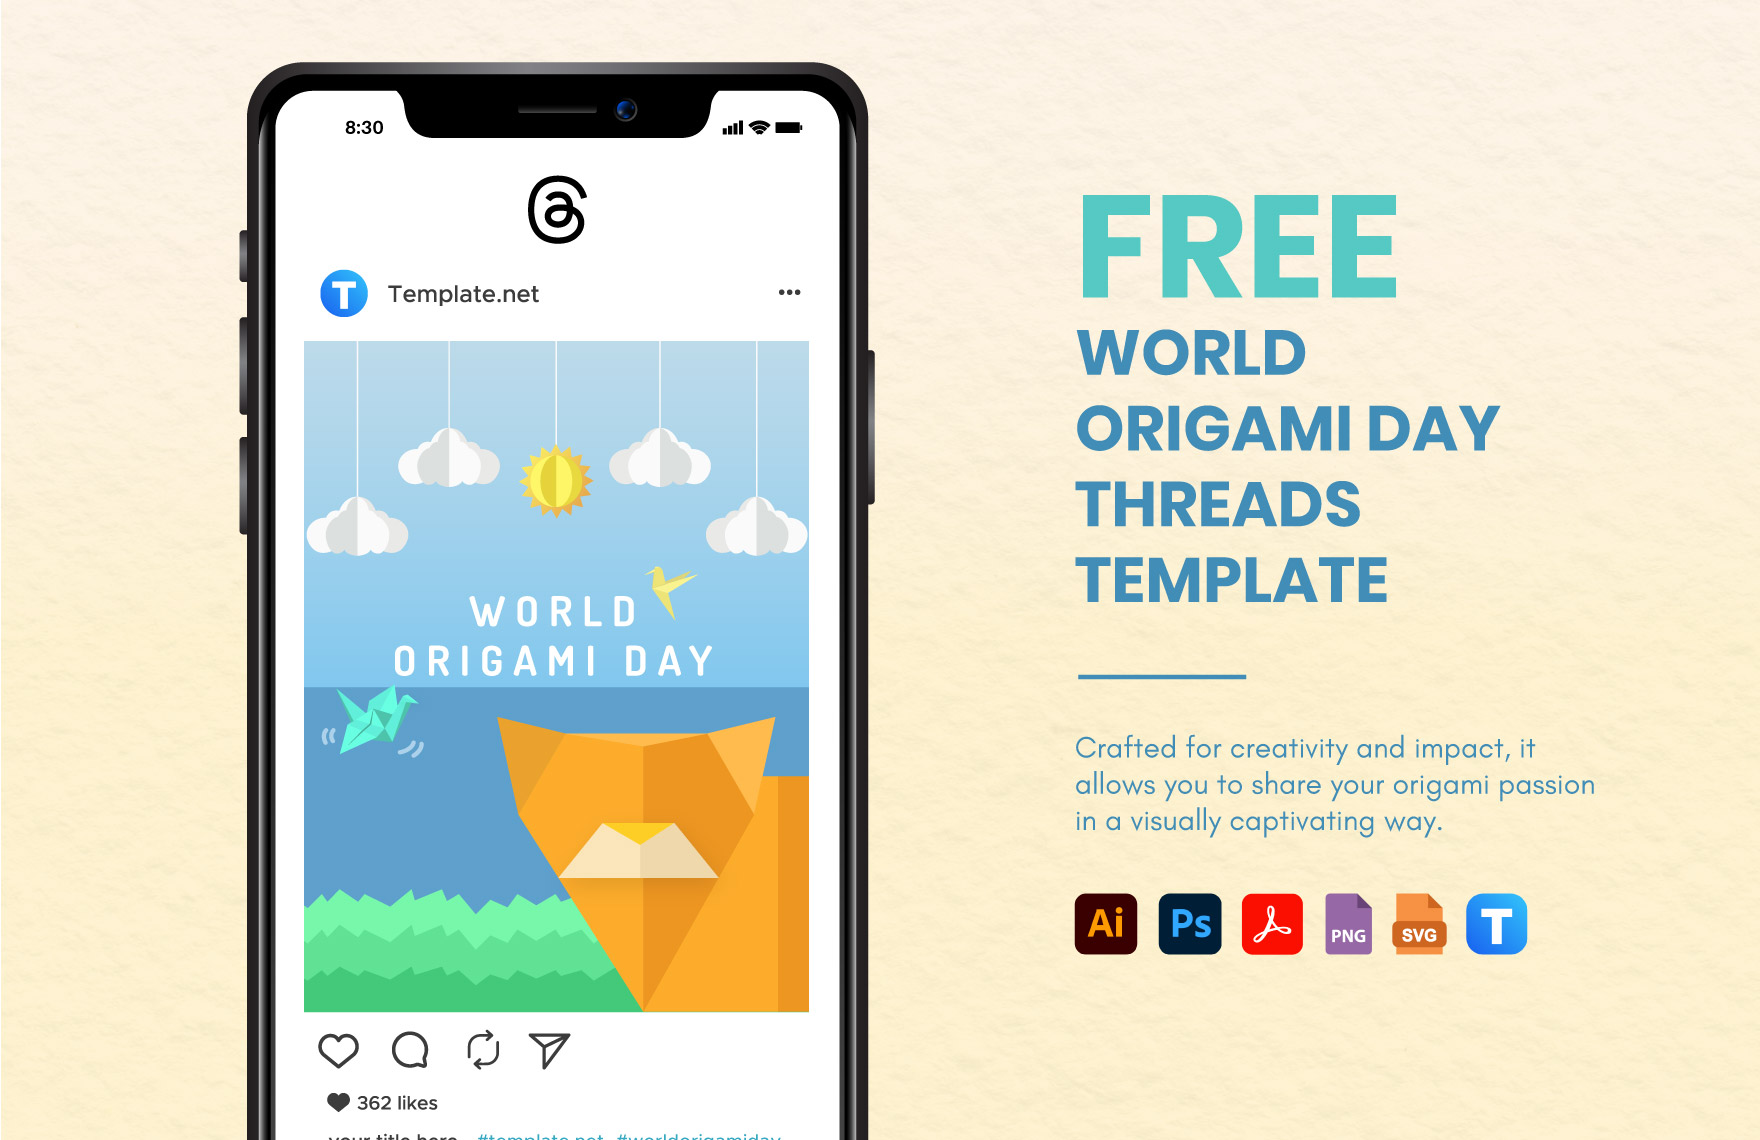 Free World Origami Day Threads Post Template in PDF, Illustrator, PSD, SVG, PNG